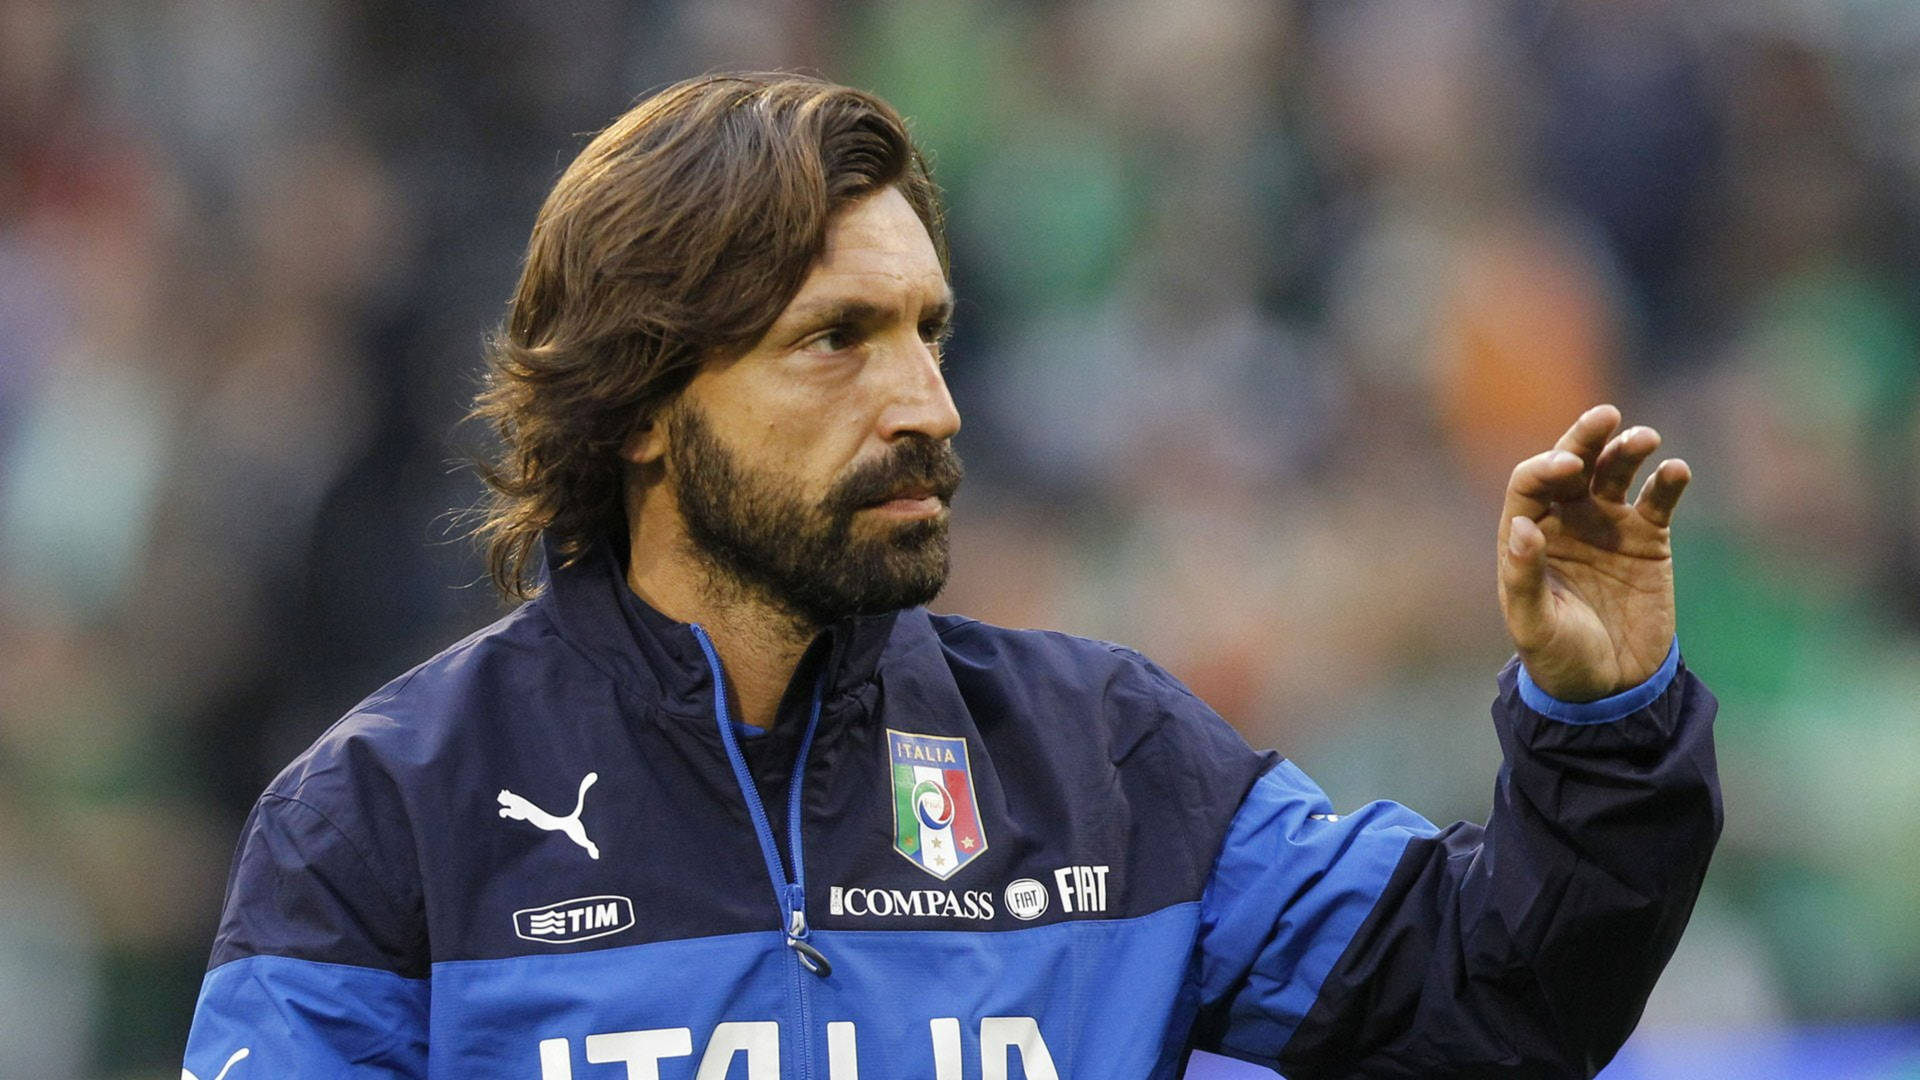 Andrea Pirlo Wallpaper Images